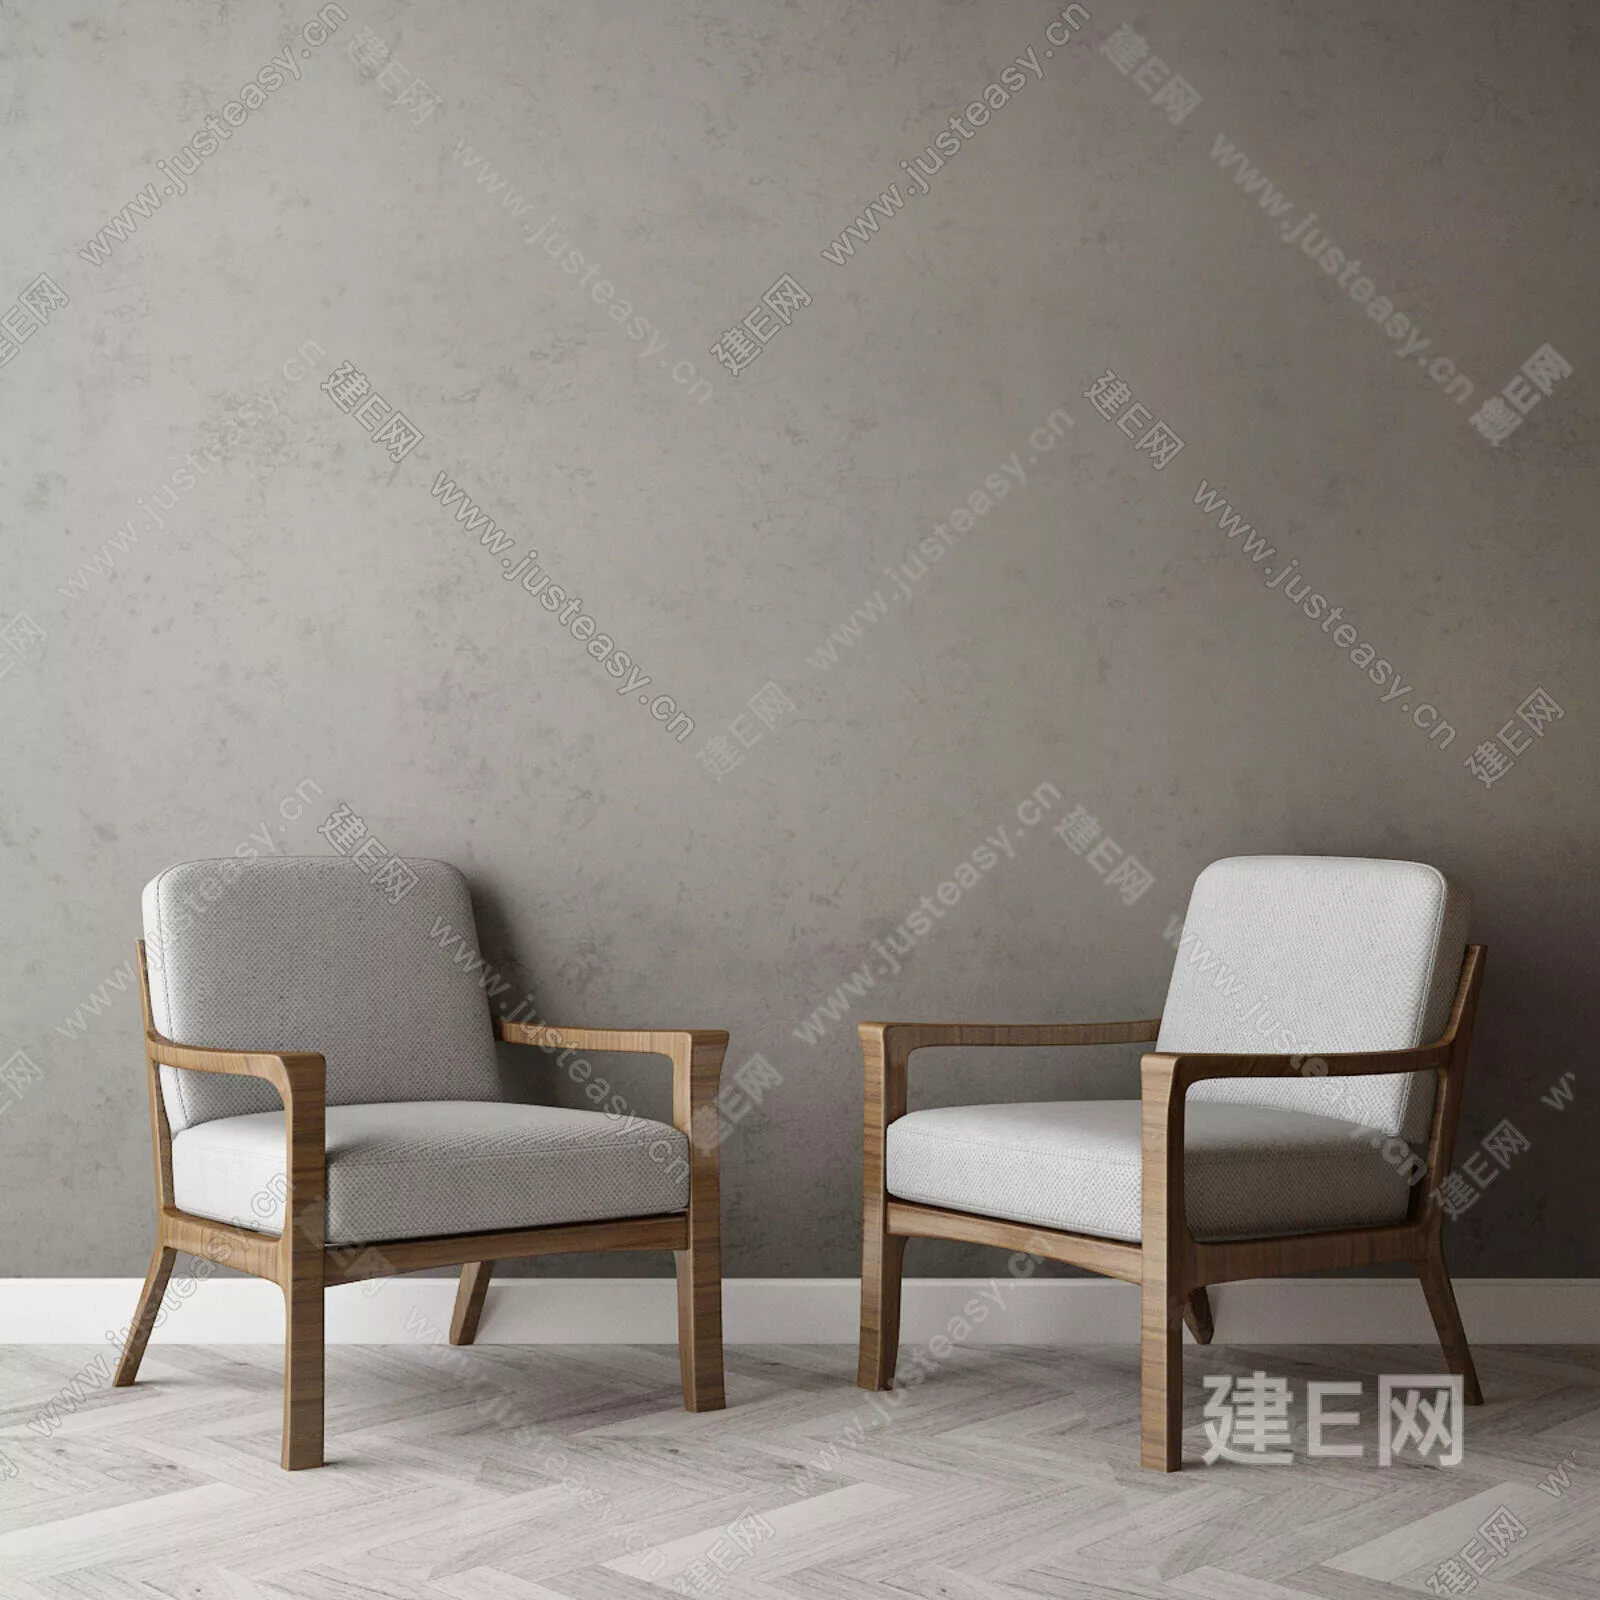 CHINESE LOUNGLE CHAIR - SKETCHUP 3D MODEL - VRAY - 115361154